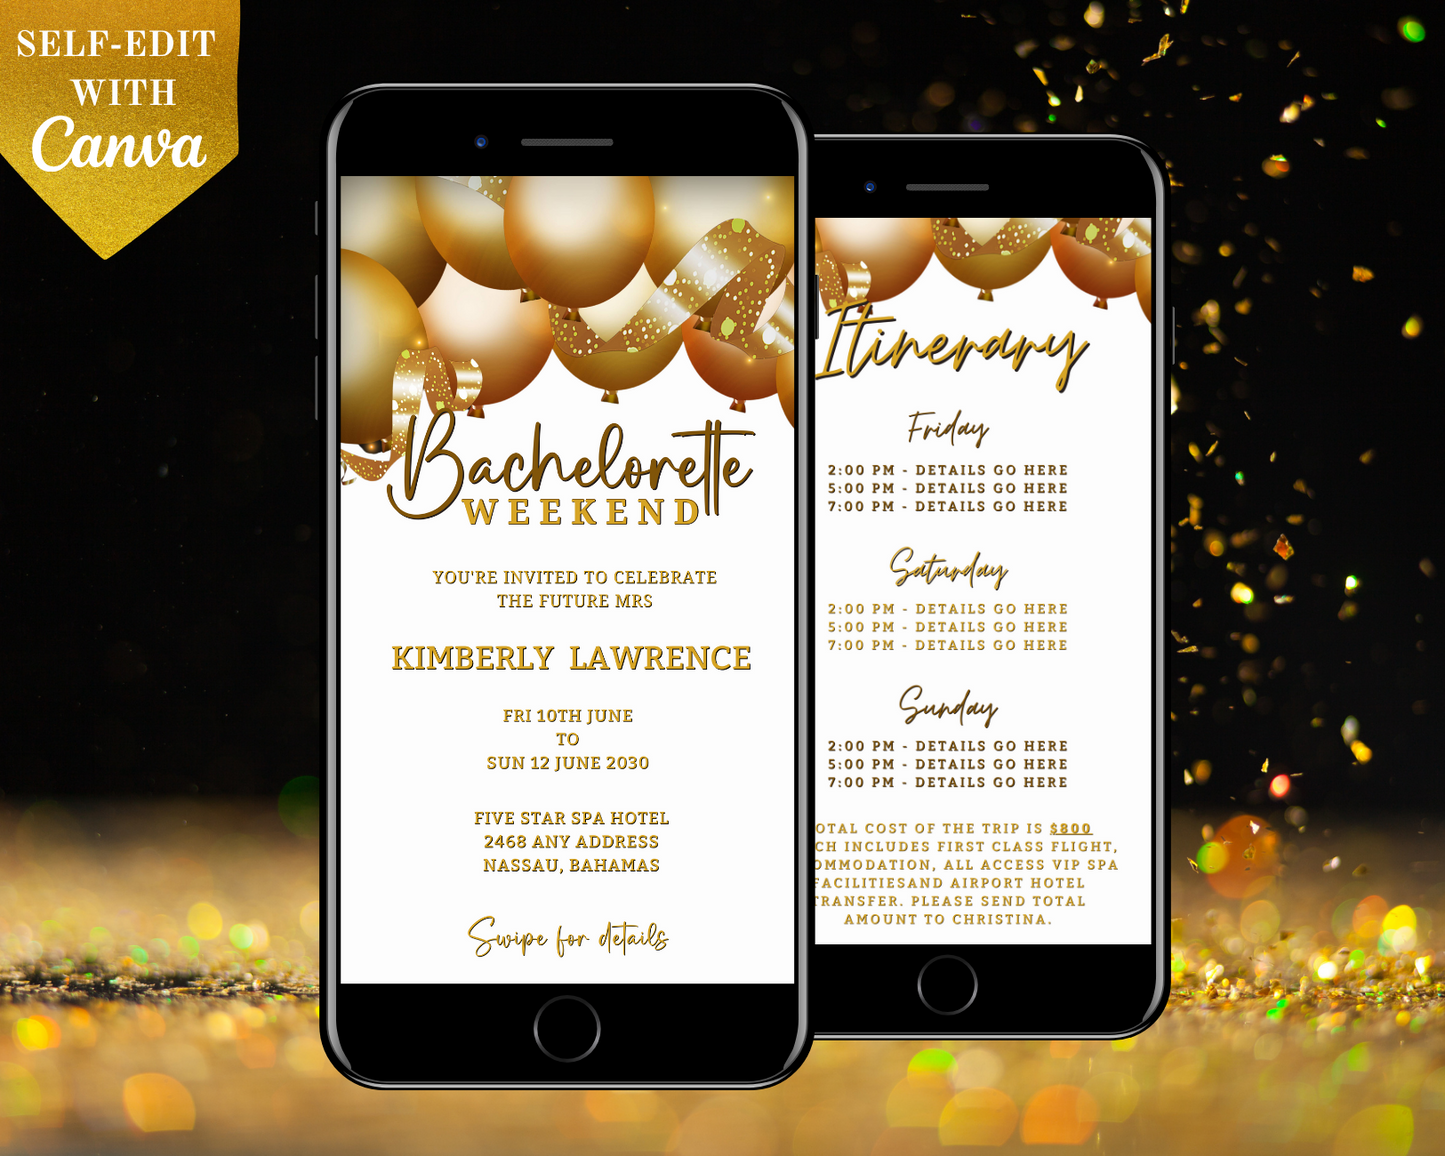 Customisable Gold Floating Balloons | Bachelorette Weekend Evite displayed on smartphones, showcasing the template's design and personalization options for digital invitations.